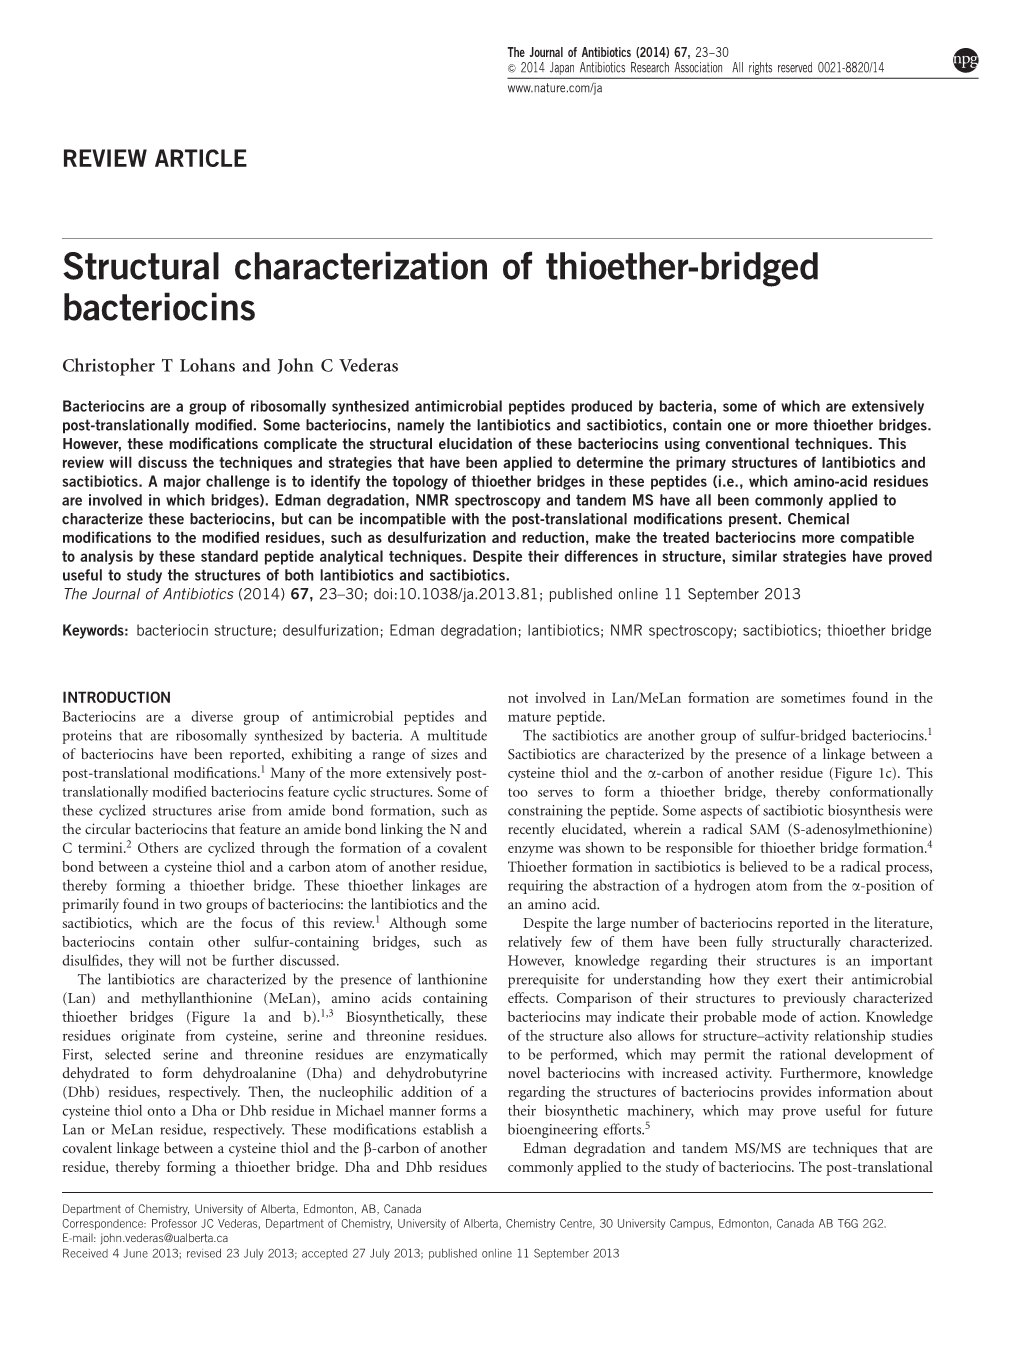 Structural Characterization of Thioether-Bridged Bacteriocins